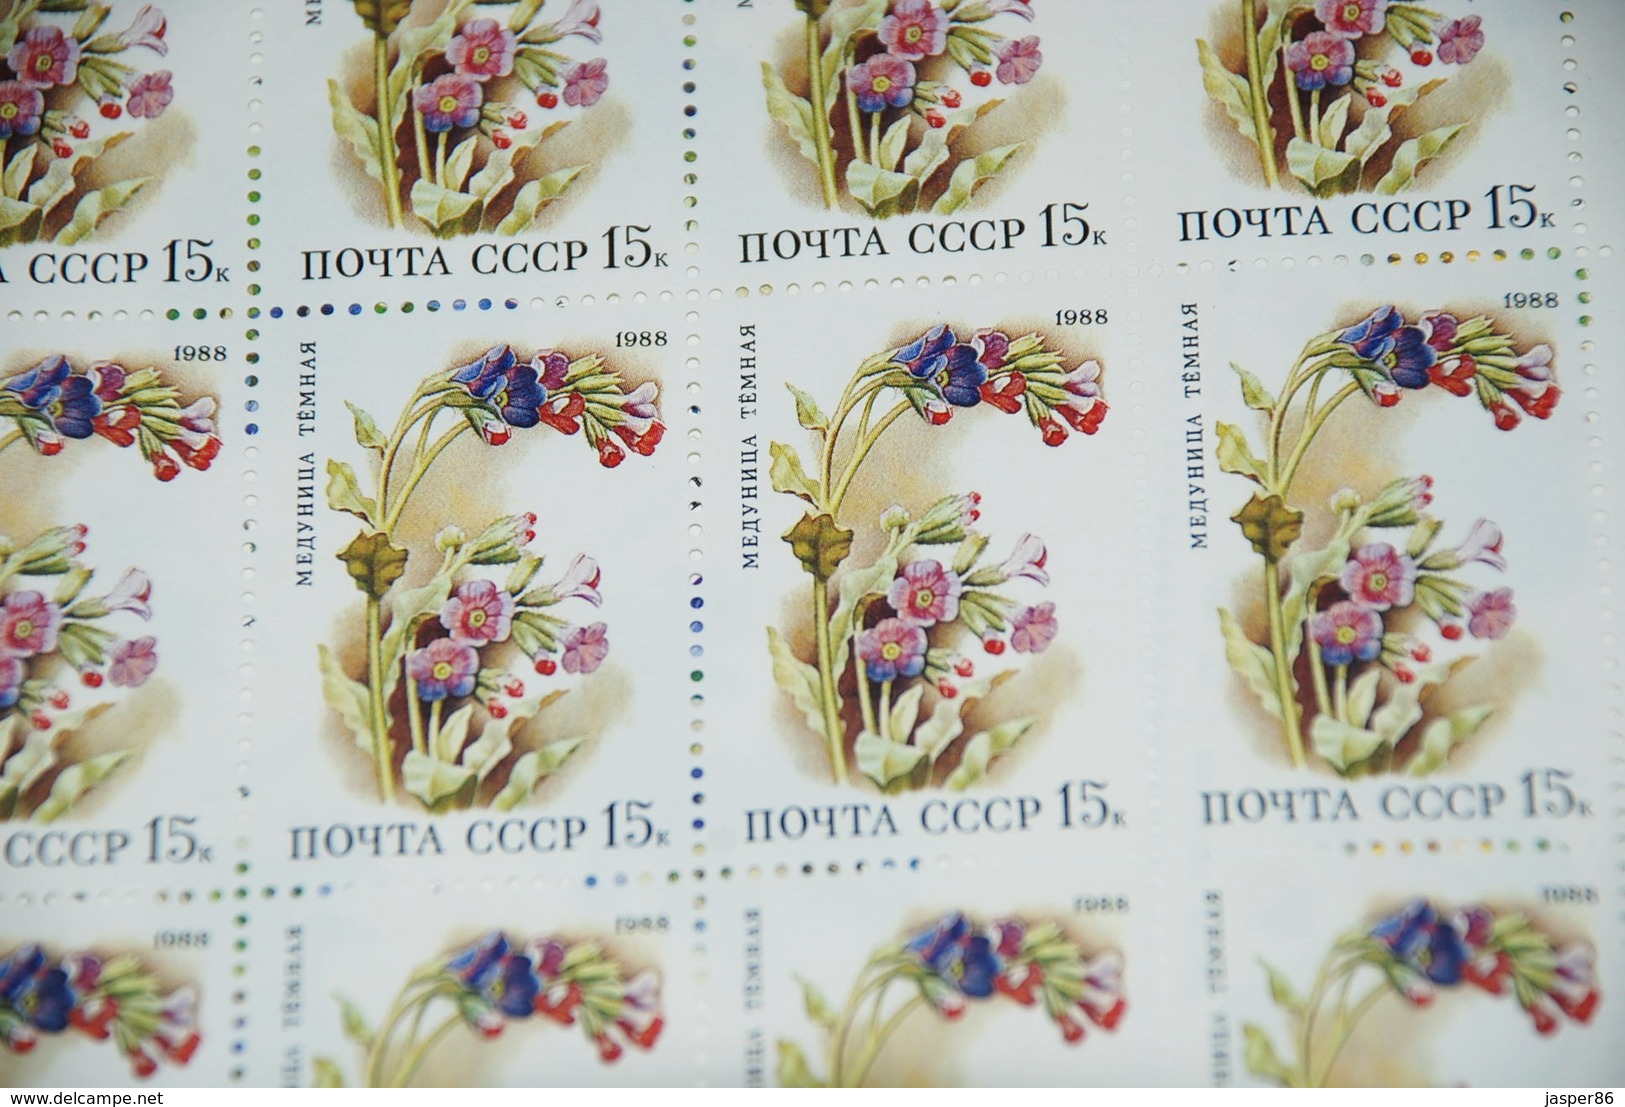 Russia MNH Sc 5687-5691 Mi 5847-5851 Bell Flower, Lily Complete sheets CV$100.80